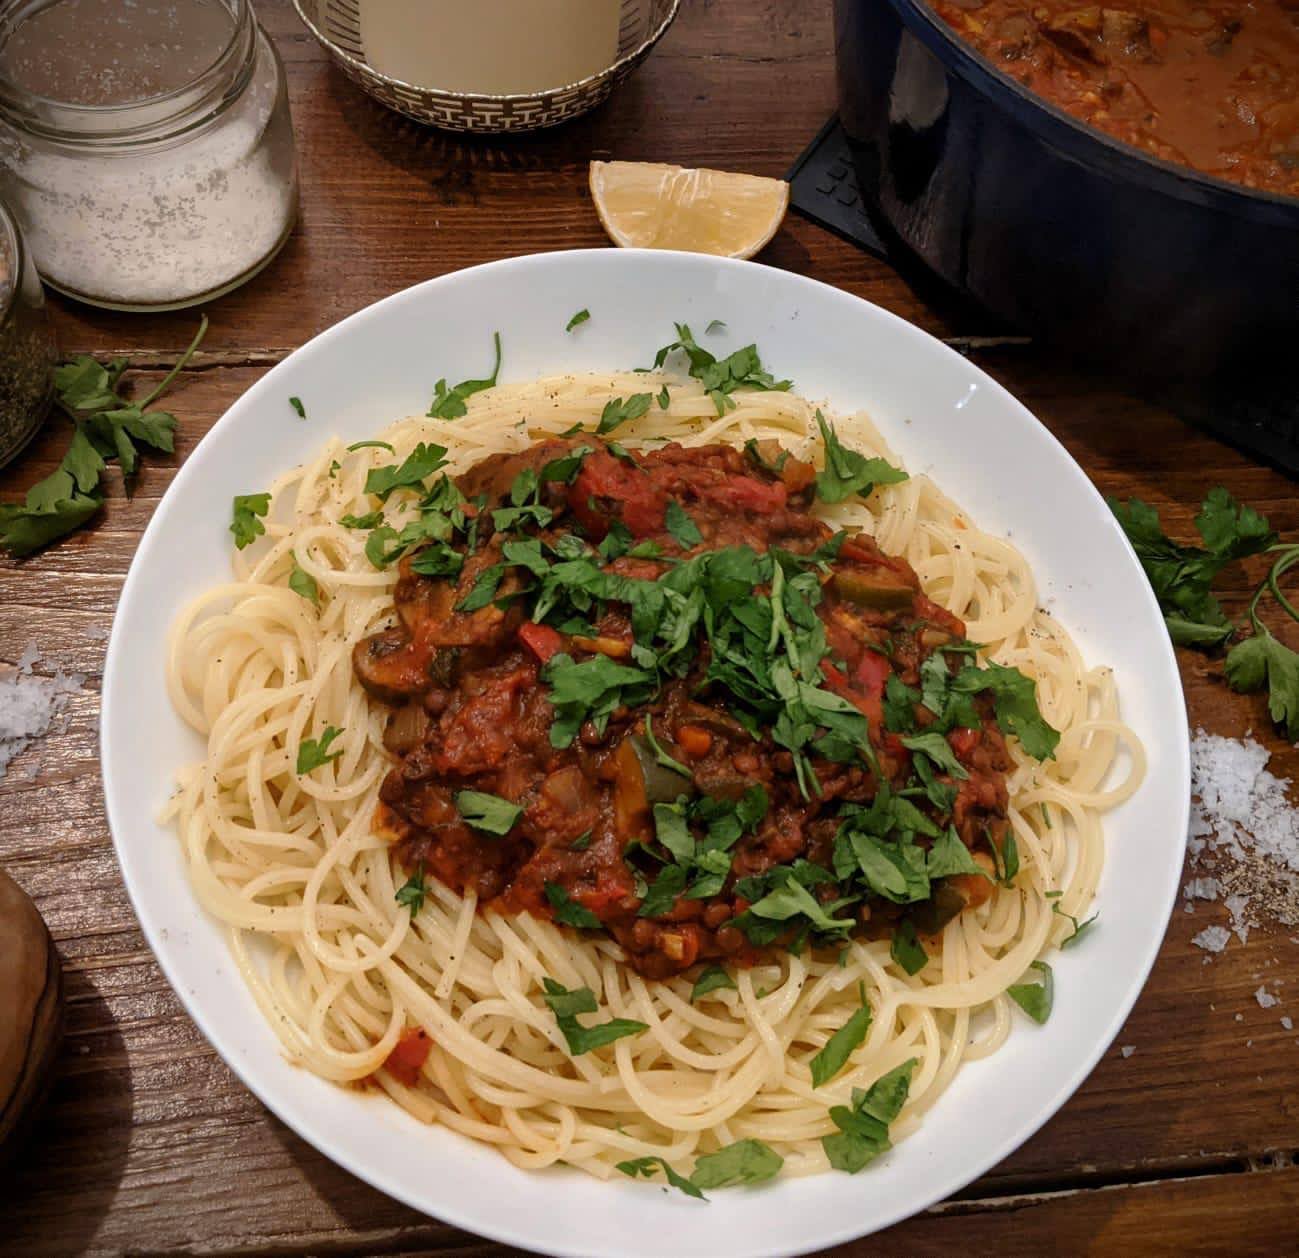 A plate of spaghetti with lentil bolognese, sprinkled with fresh herbs